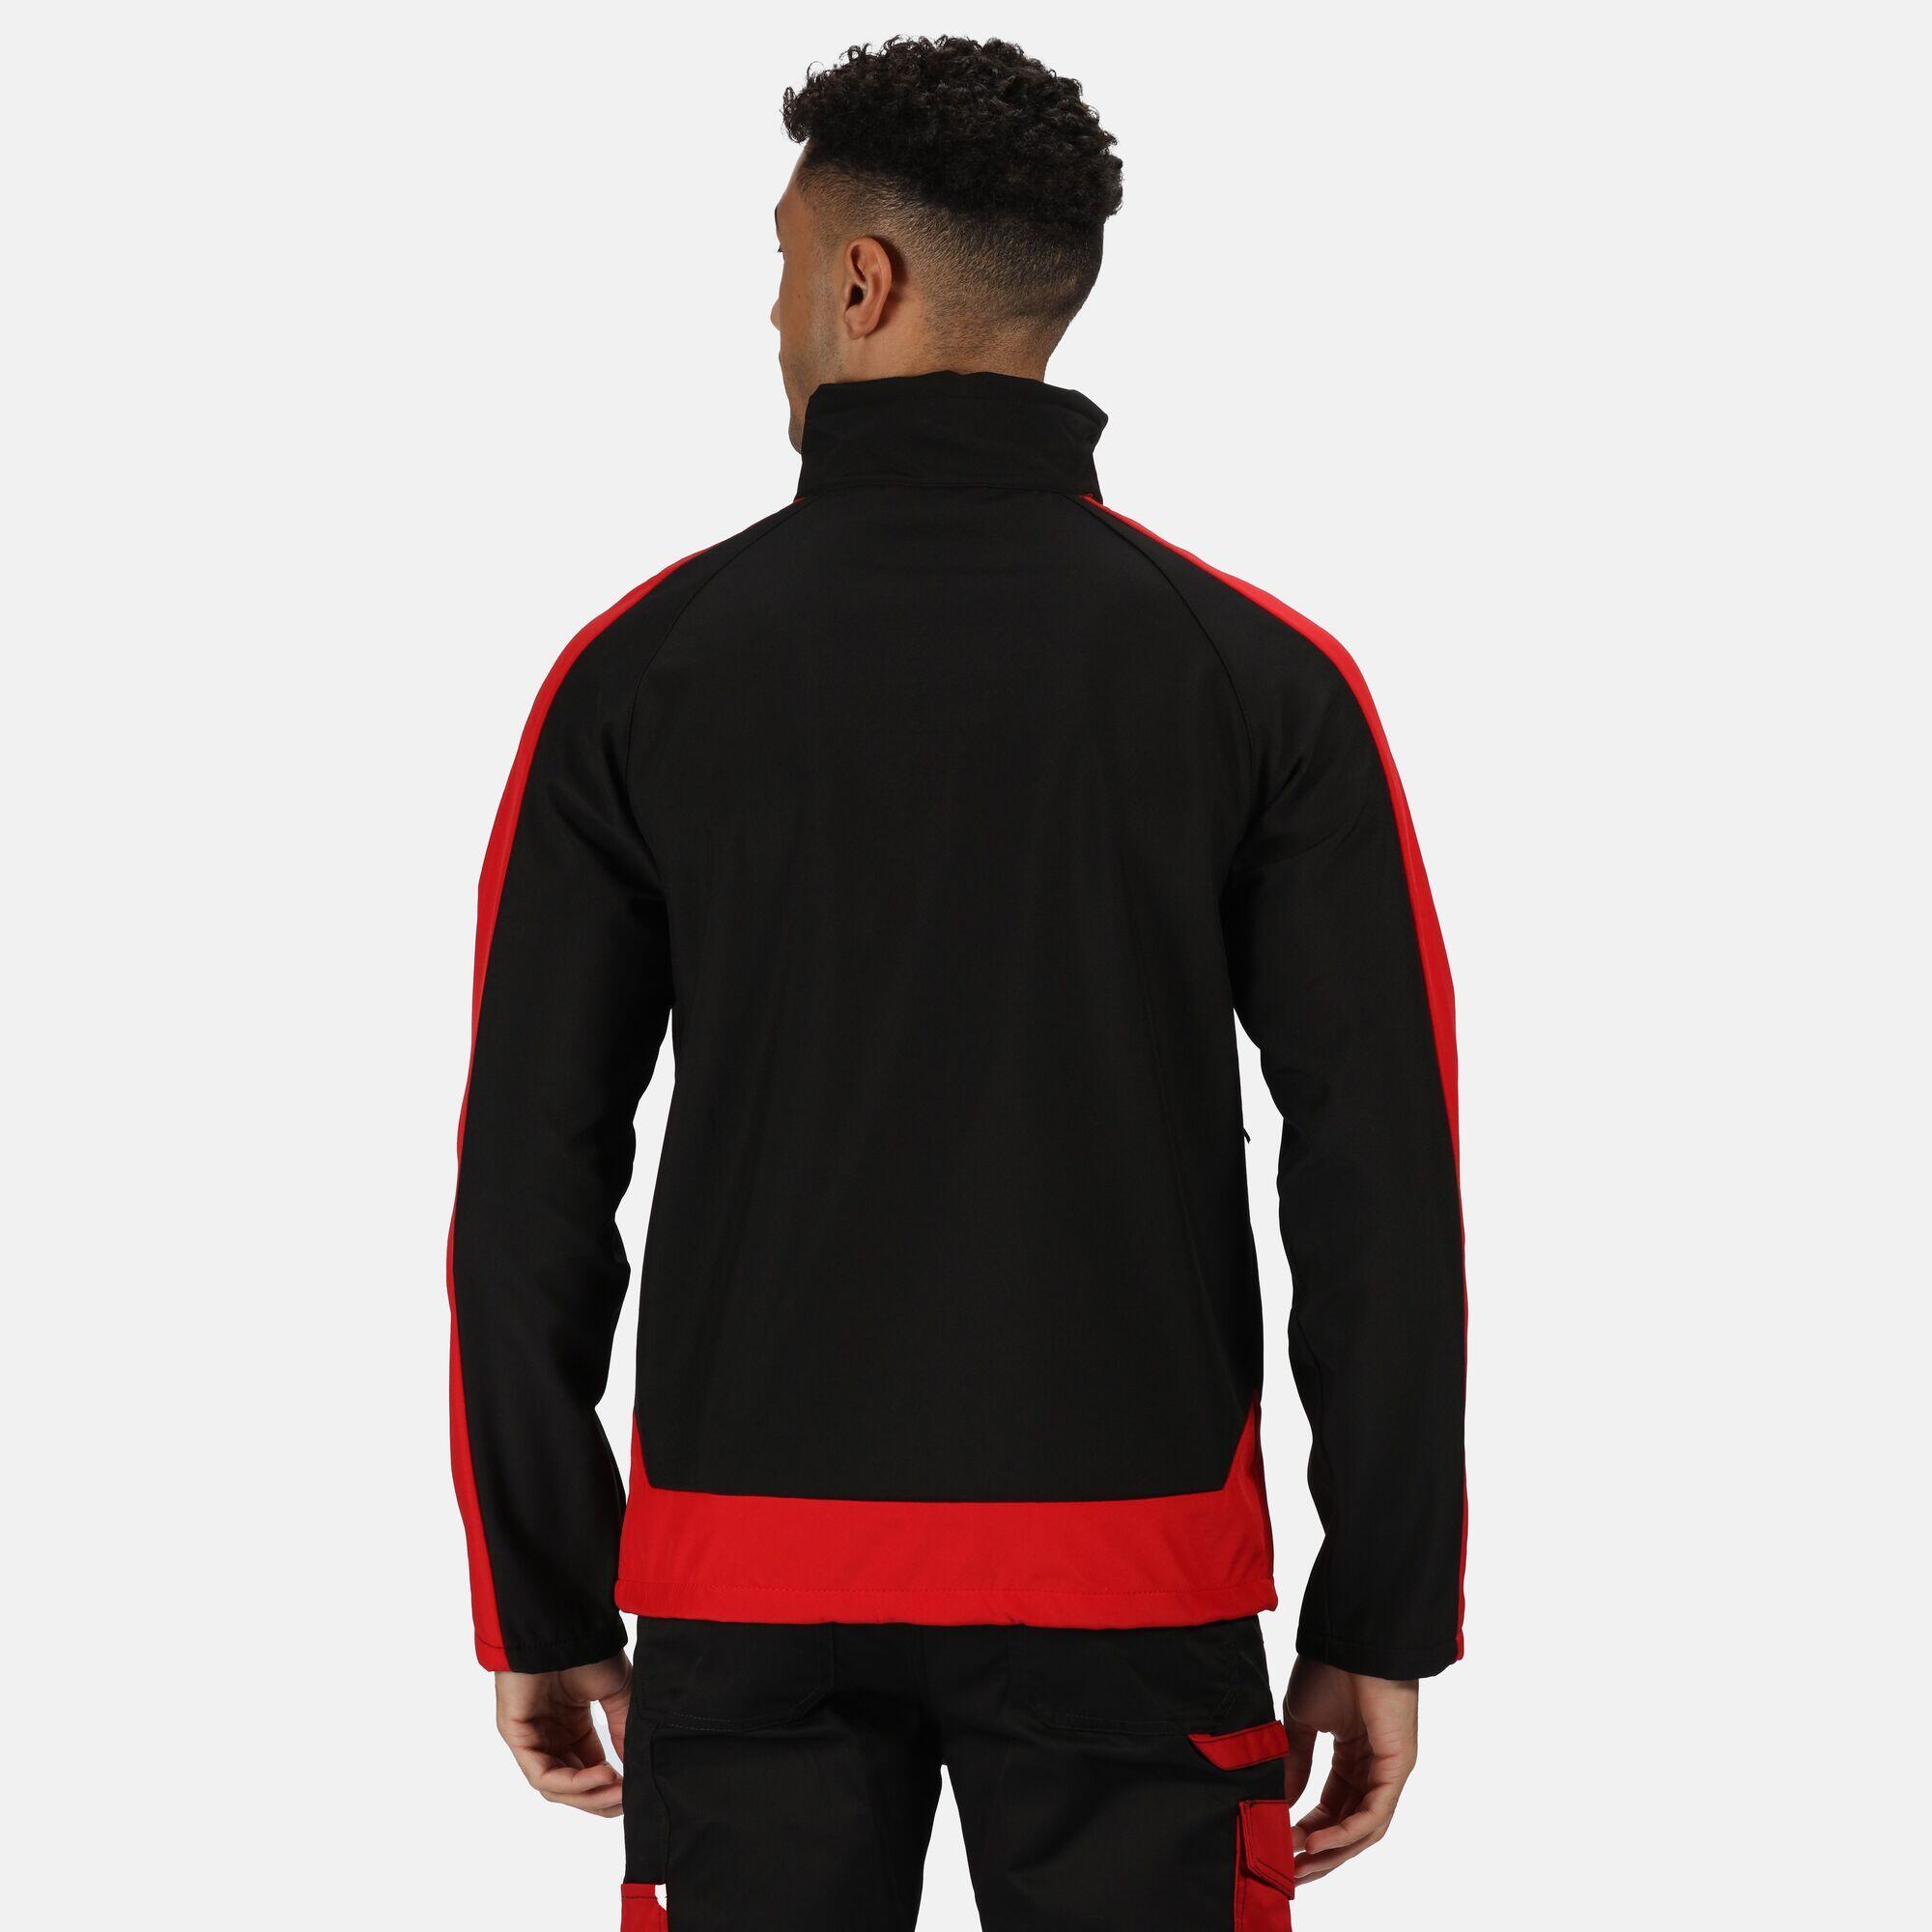 Mens Contrast 3 Layer Softshell Full Zip Jacket (Jet Black/Orient Red) 4/5